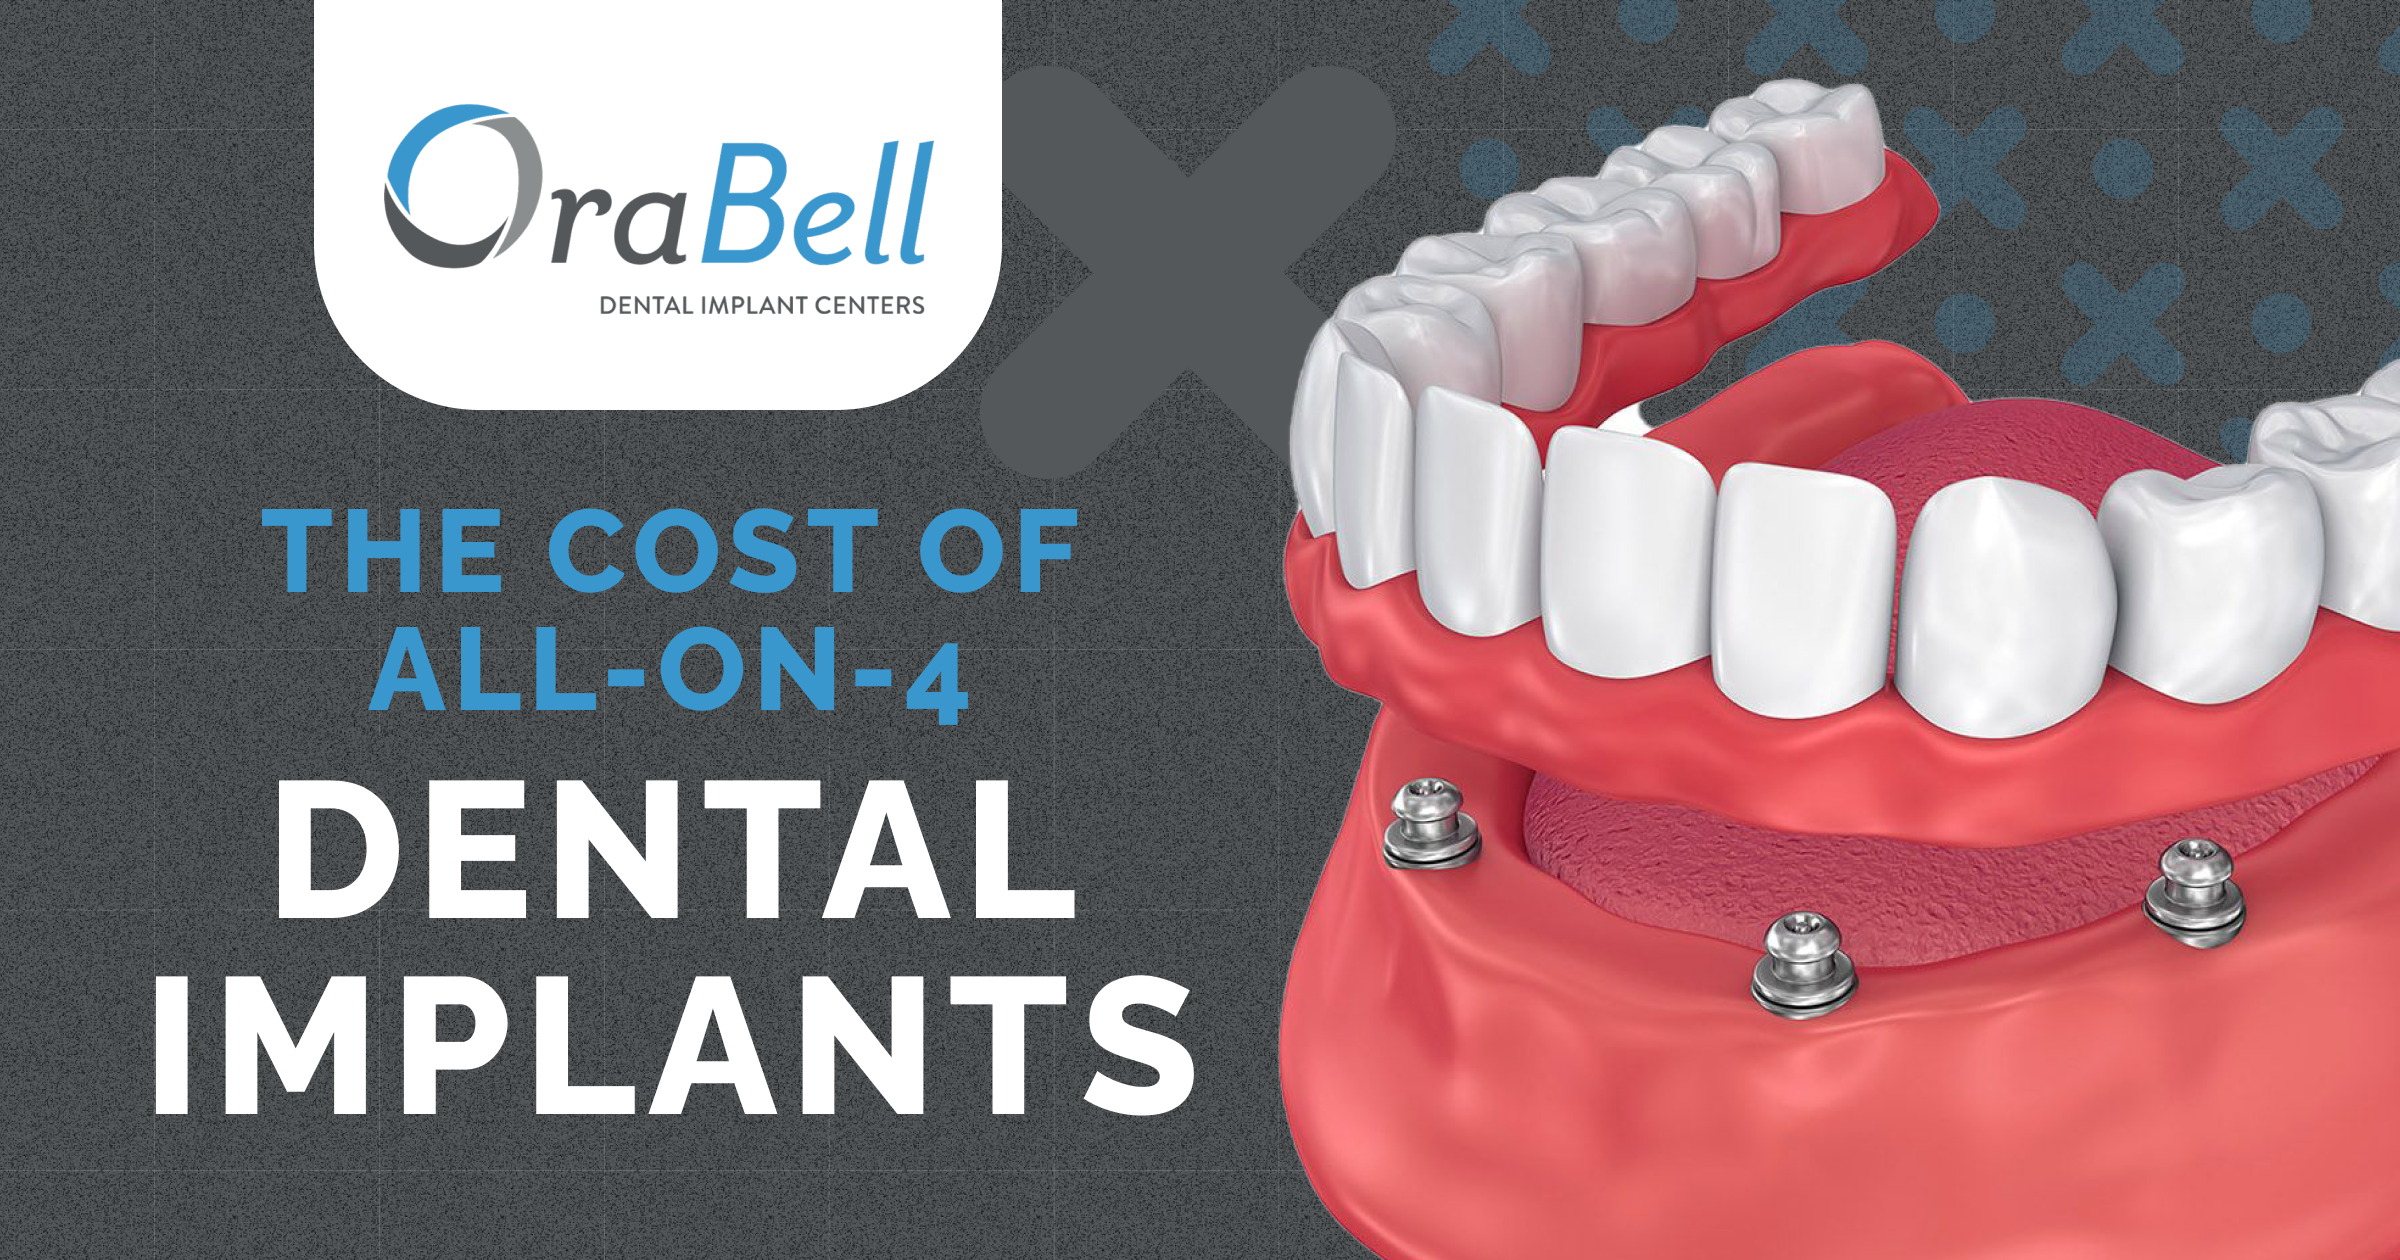 OraBell The Cost Of All On 4 Dental Implants 